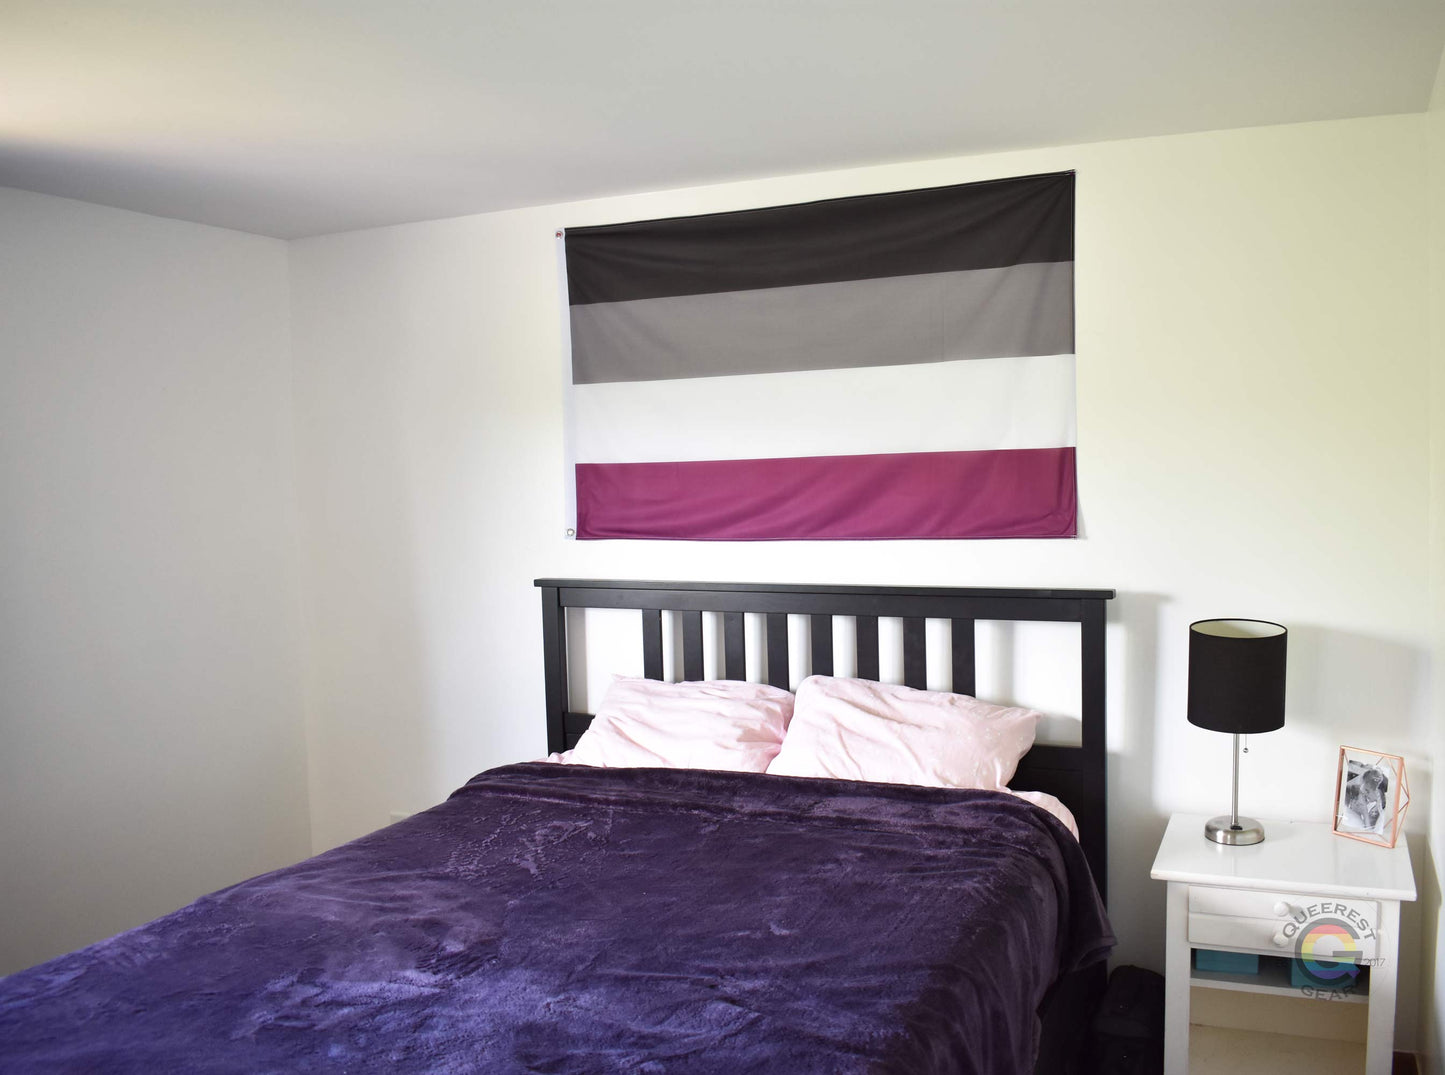 3’x5’ asexual pride flag hanging horizontally on the wall of a bedroom centered above a bed with a purple blanket